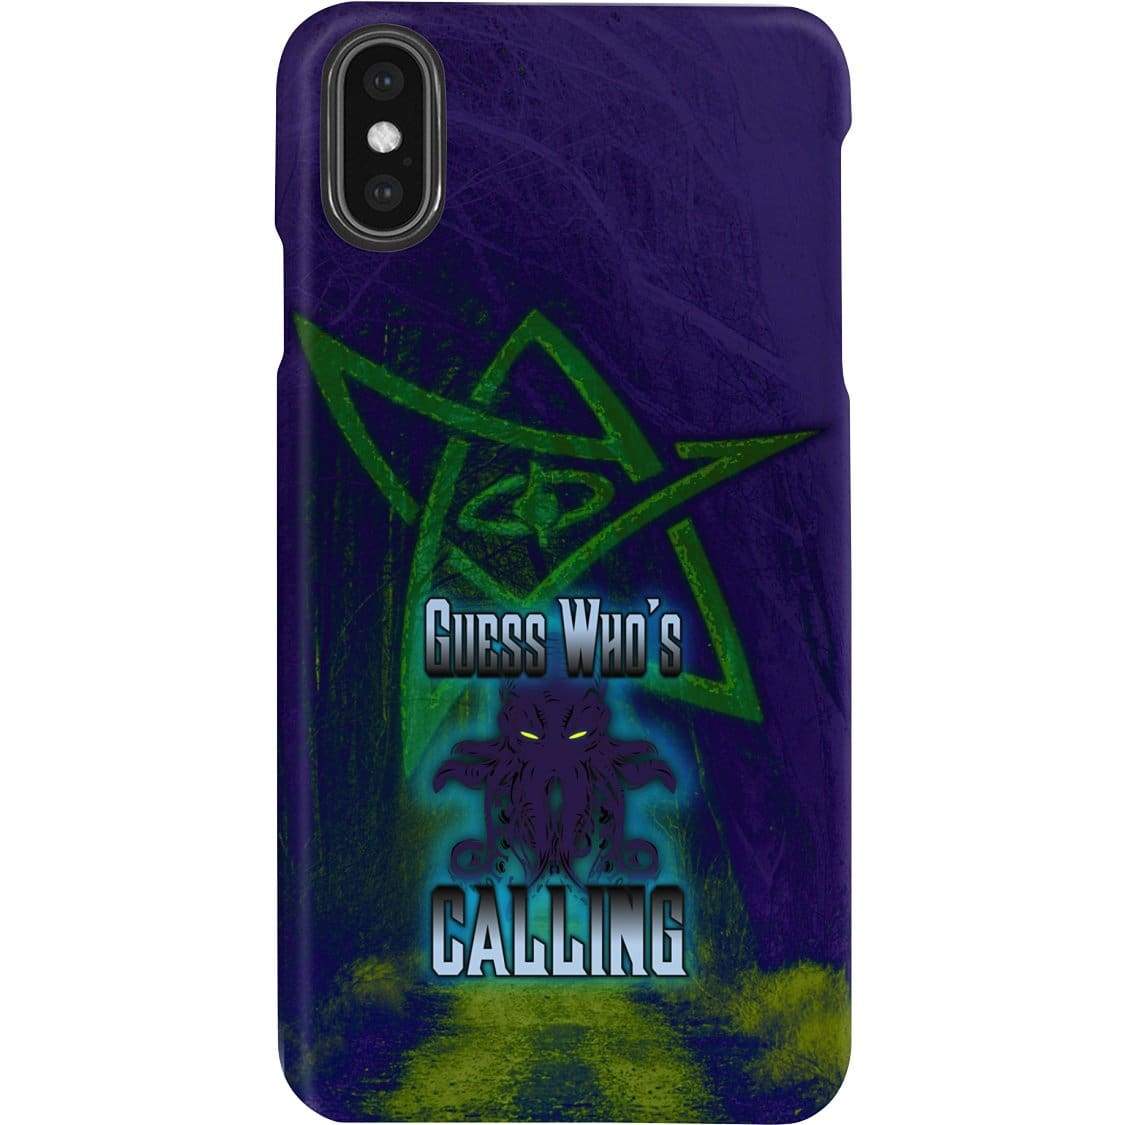 Cthulhu - Guess Who’s Calling Phone Case - Snap * iPhone * Samsung * - iPhone XS Max Case / Gloss / Apparel